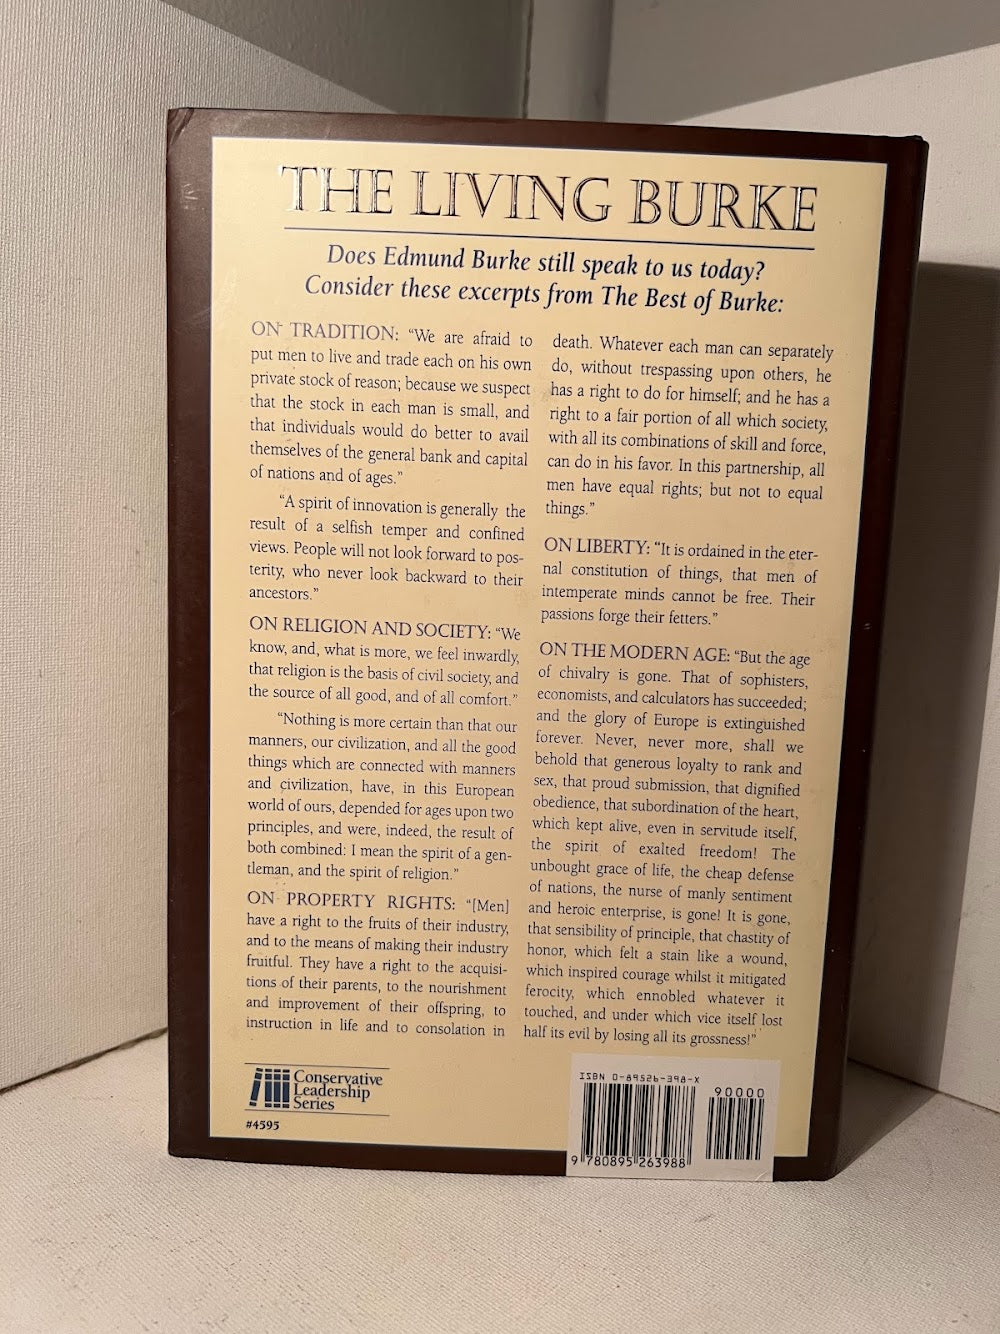 The Best of Burke & The Theory of Moral Sentiments by Adam Smith